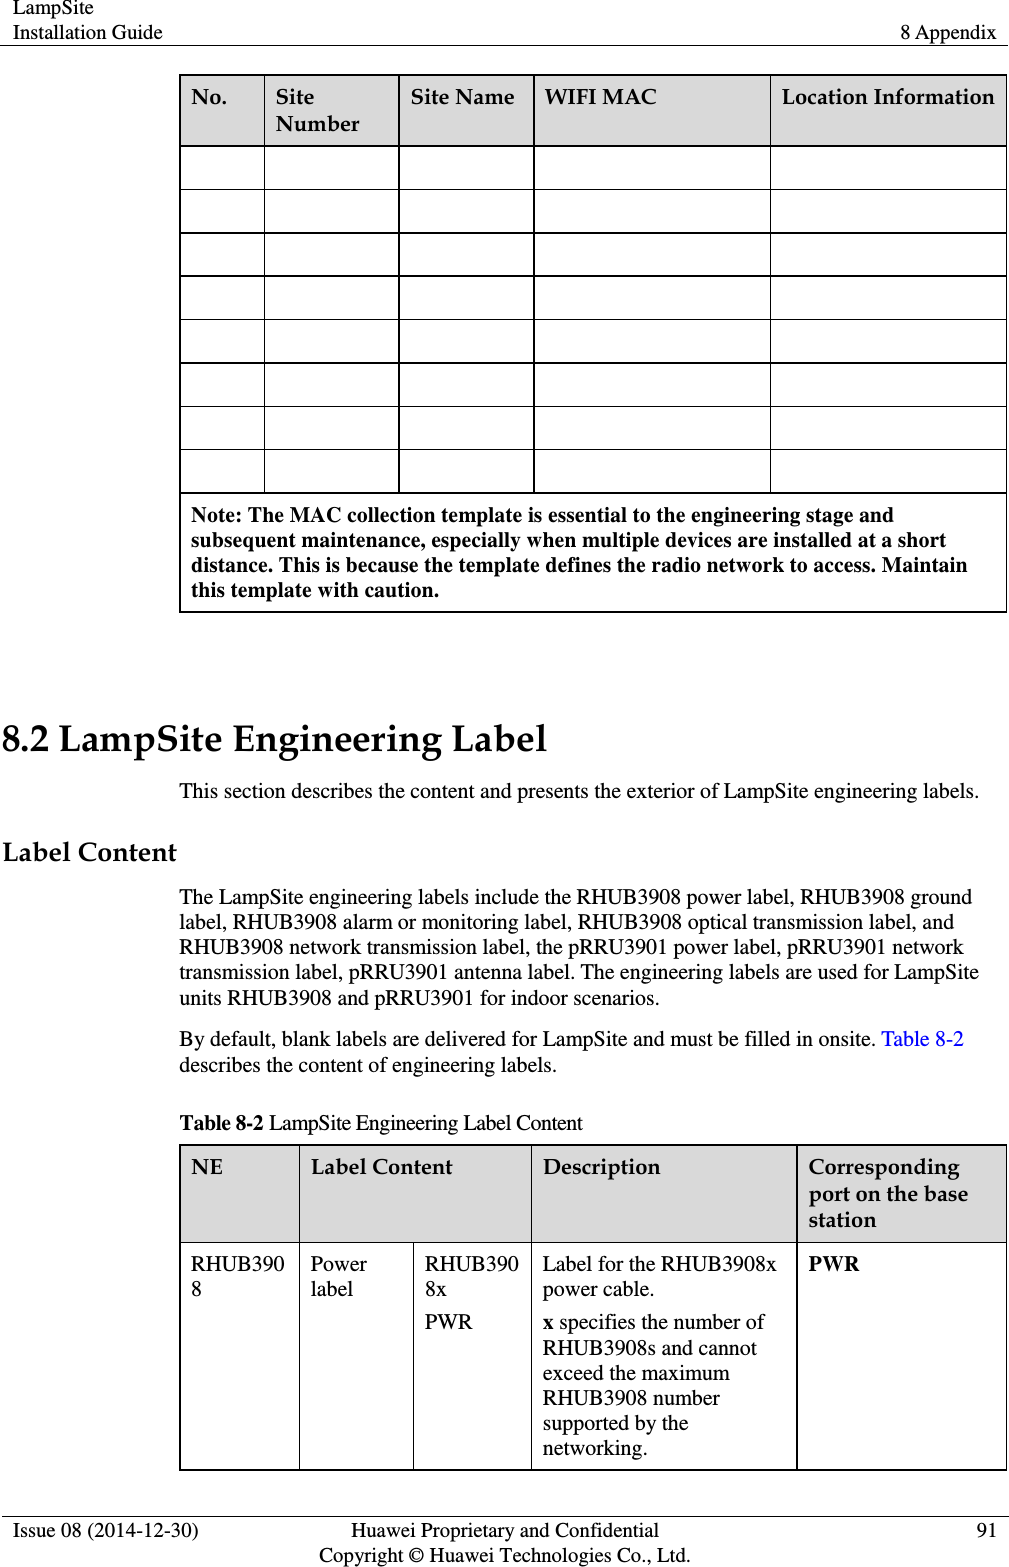 LampSite Installation Guide 8 Appendix  Issue 08 (2014-12-30) Huawei Proprietary and Confidential                                     Copyright © Huawei Technologies Co., Ltd. 91  No. Site Number Site Name WIFI MAC Location Information                                         Note: The MAC collection template is essential to the engineering stage and subsequent maintenance, especially when multiple devices are installed at a short distance. This is because the template defines the radio network to access. Maintain this template with caution.  8.2 LampSite Engineering Label This section describes the content and presents the exterior of LampSite engineering labels. Label Content The LampSite engineering labels include the RHUB3908 power label, RHUB3908 ground label, RHUB3908 alarm or monitoring label, RHUB3908 optical transmission label, and RHUB3908 network transmission label, the pRRU3901 power label, pRRU3901 network transmission label, pRRU3901 antenna label. The engineering labels are used for LampSite units RHUB3908 and pRRU3901 for indoor scenarios. By default, blank labels are delivered for LampSite and must be filled in onsite. Table 8-2 describes the content of engineering labels. Table 8-2 LampSite Engineering Label Content NE Label Content Description Corresponding port on the base station RHUB3908 Power label RHUB3908x PWR Label for the RHUB3908x power cable. x specifies the number of RHUB3908s and cannot exceed the maximum RHUB3908 number supported by the networking. PWR 